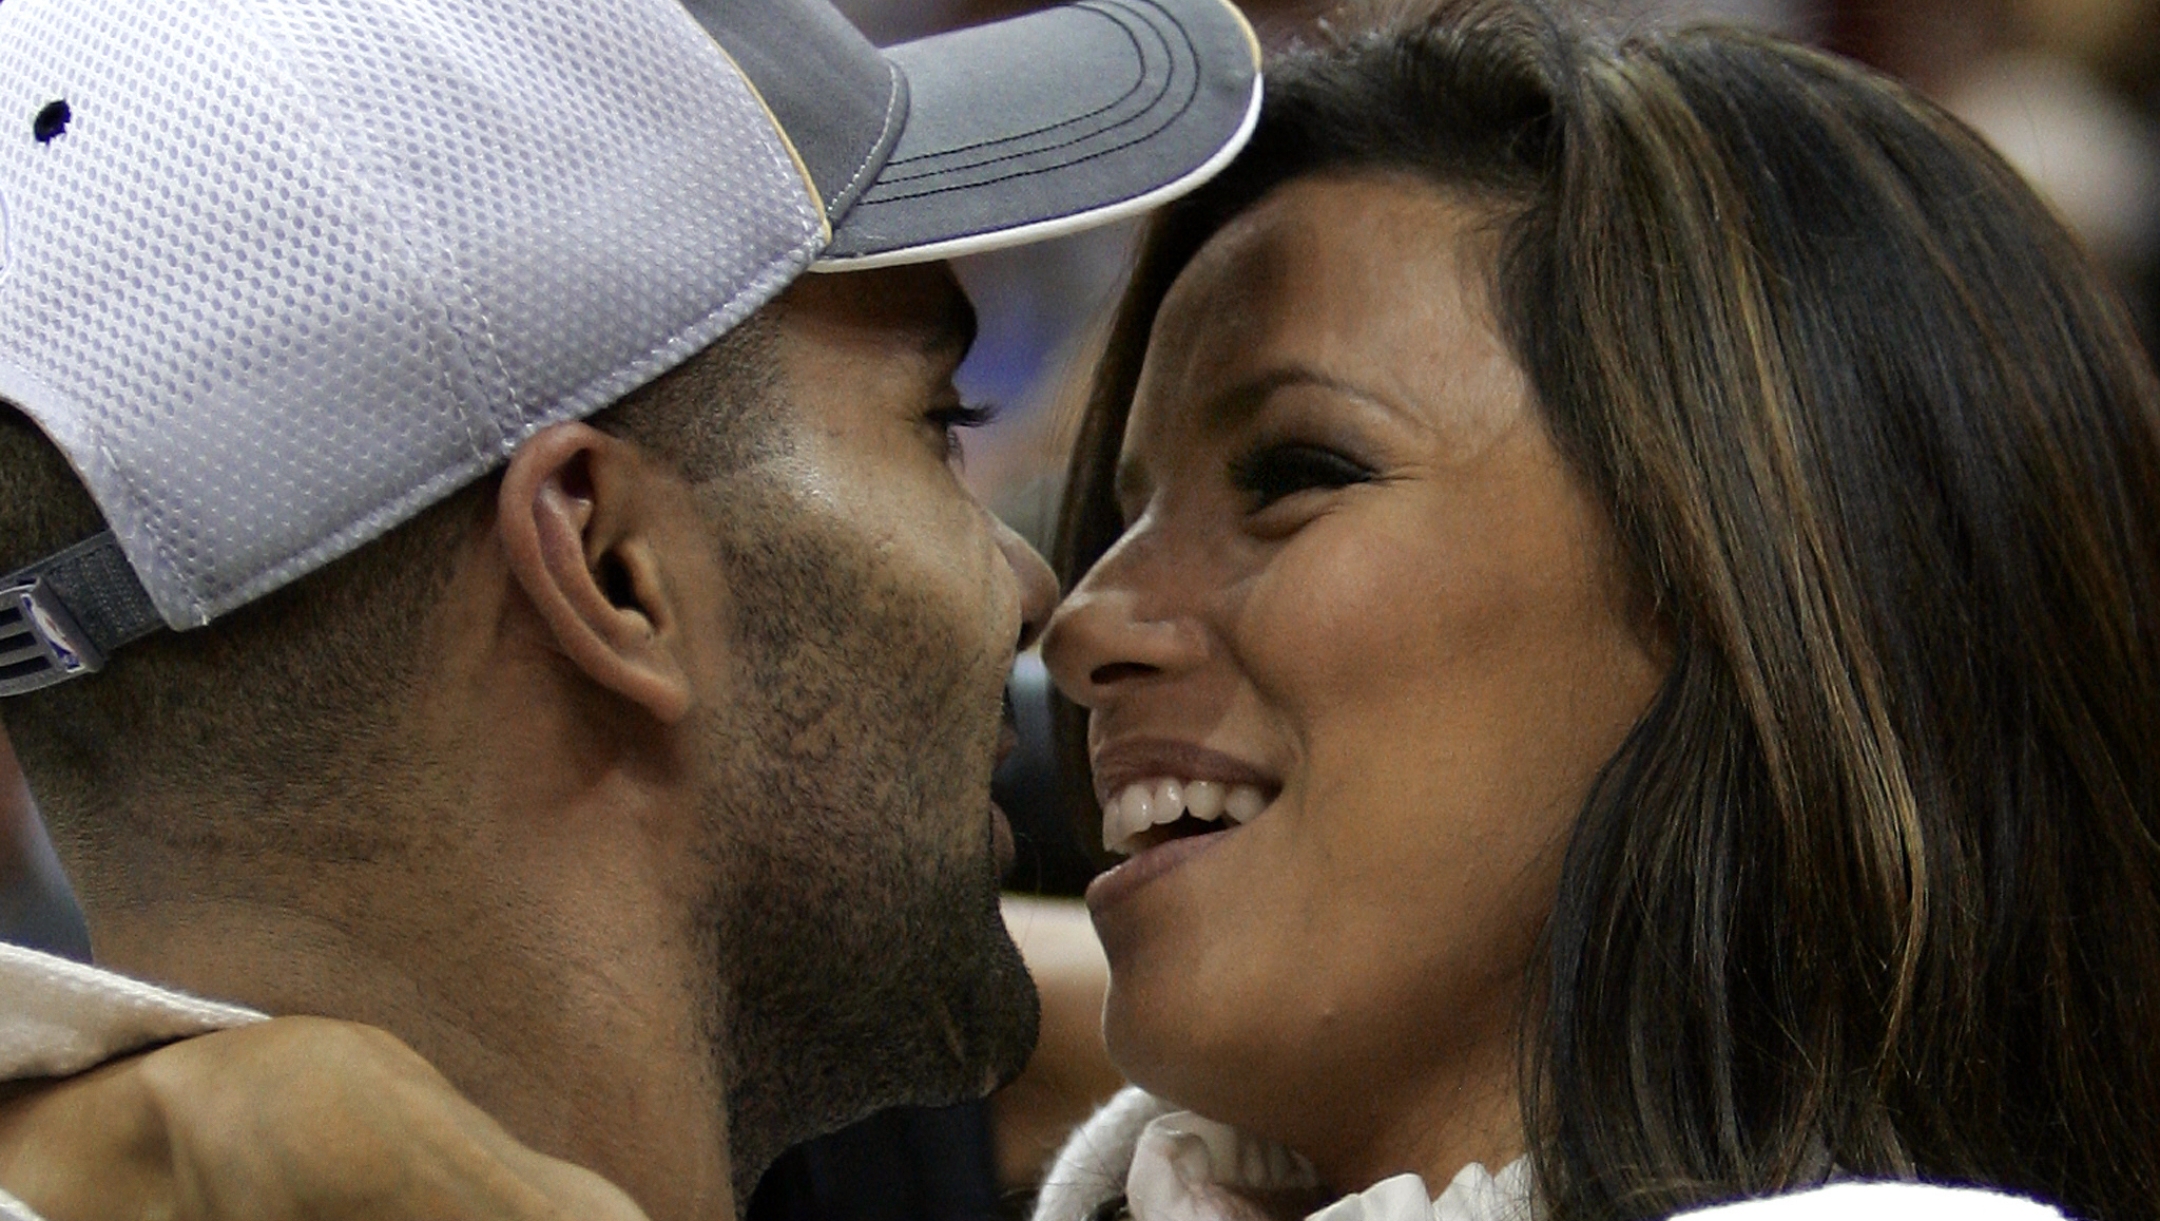 Tony Parker of the San Antonio Spurs and MVP hugs his fiance actress Eva Longoria after leading the Spurs to their fourth NBA title beating the Cleveland Cavaliers in Game Four of the NBA Finals 14 June 2007 at Quicken Loans Arena in Cleveland, Ohio. The Spurs won the game 83-82 to sweep the best-of-seven series 4-0.    AFP PHOTO  /   TIMOTHY A. CLARY